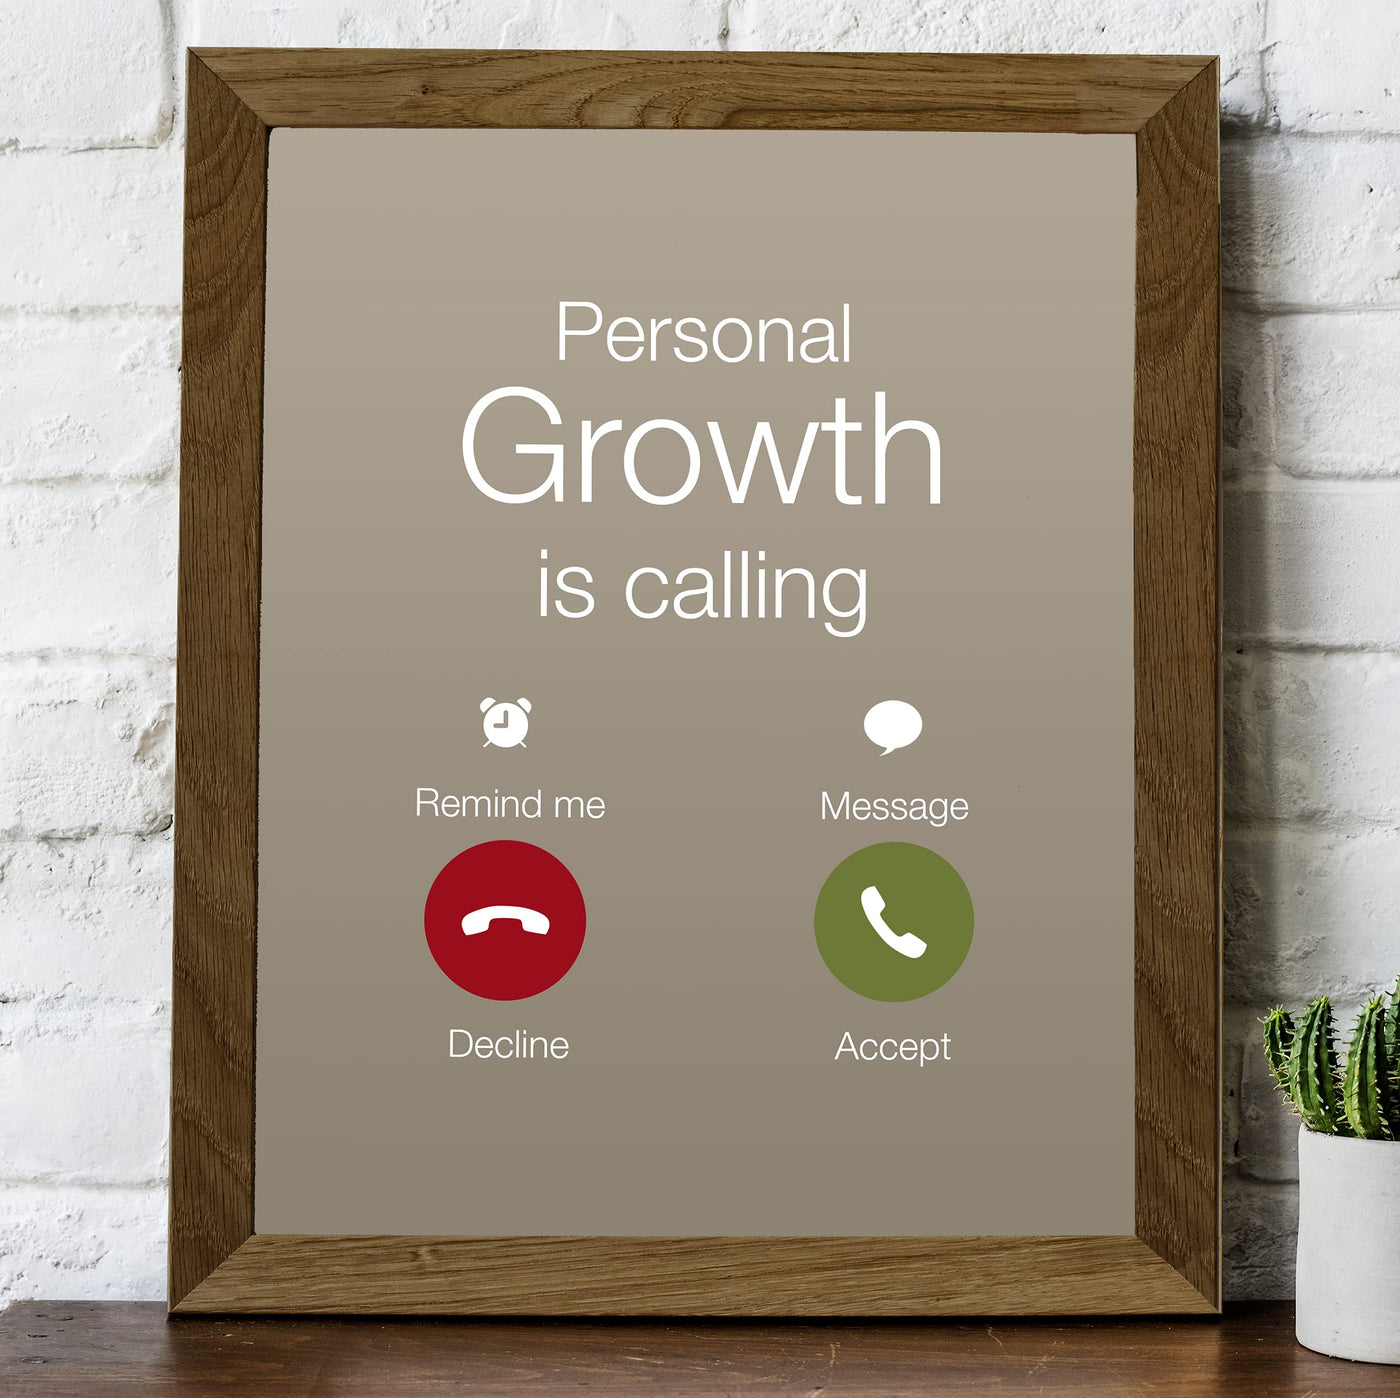 Personal Growth Is Calling Motivational Quotes Wall Sign-8 x 10" Replica Cell Phone Screen Art Print-Ready to Frame. Home-Office-Desk-School-Gym Decor. Great Smartphone Sign for Teens & Motivation!